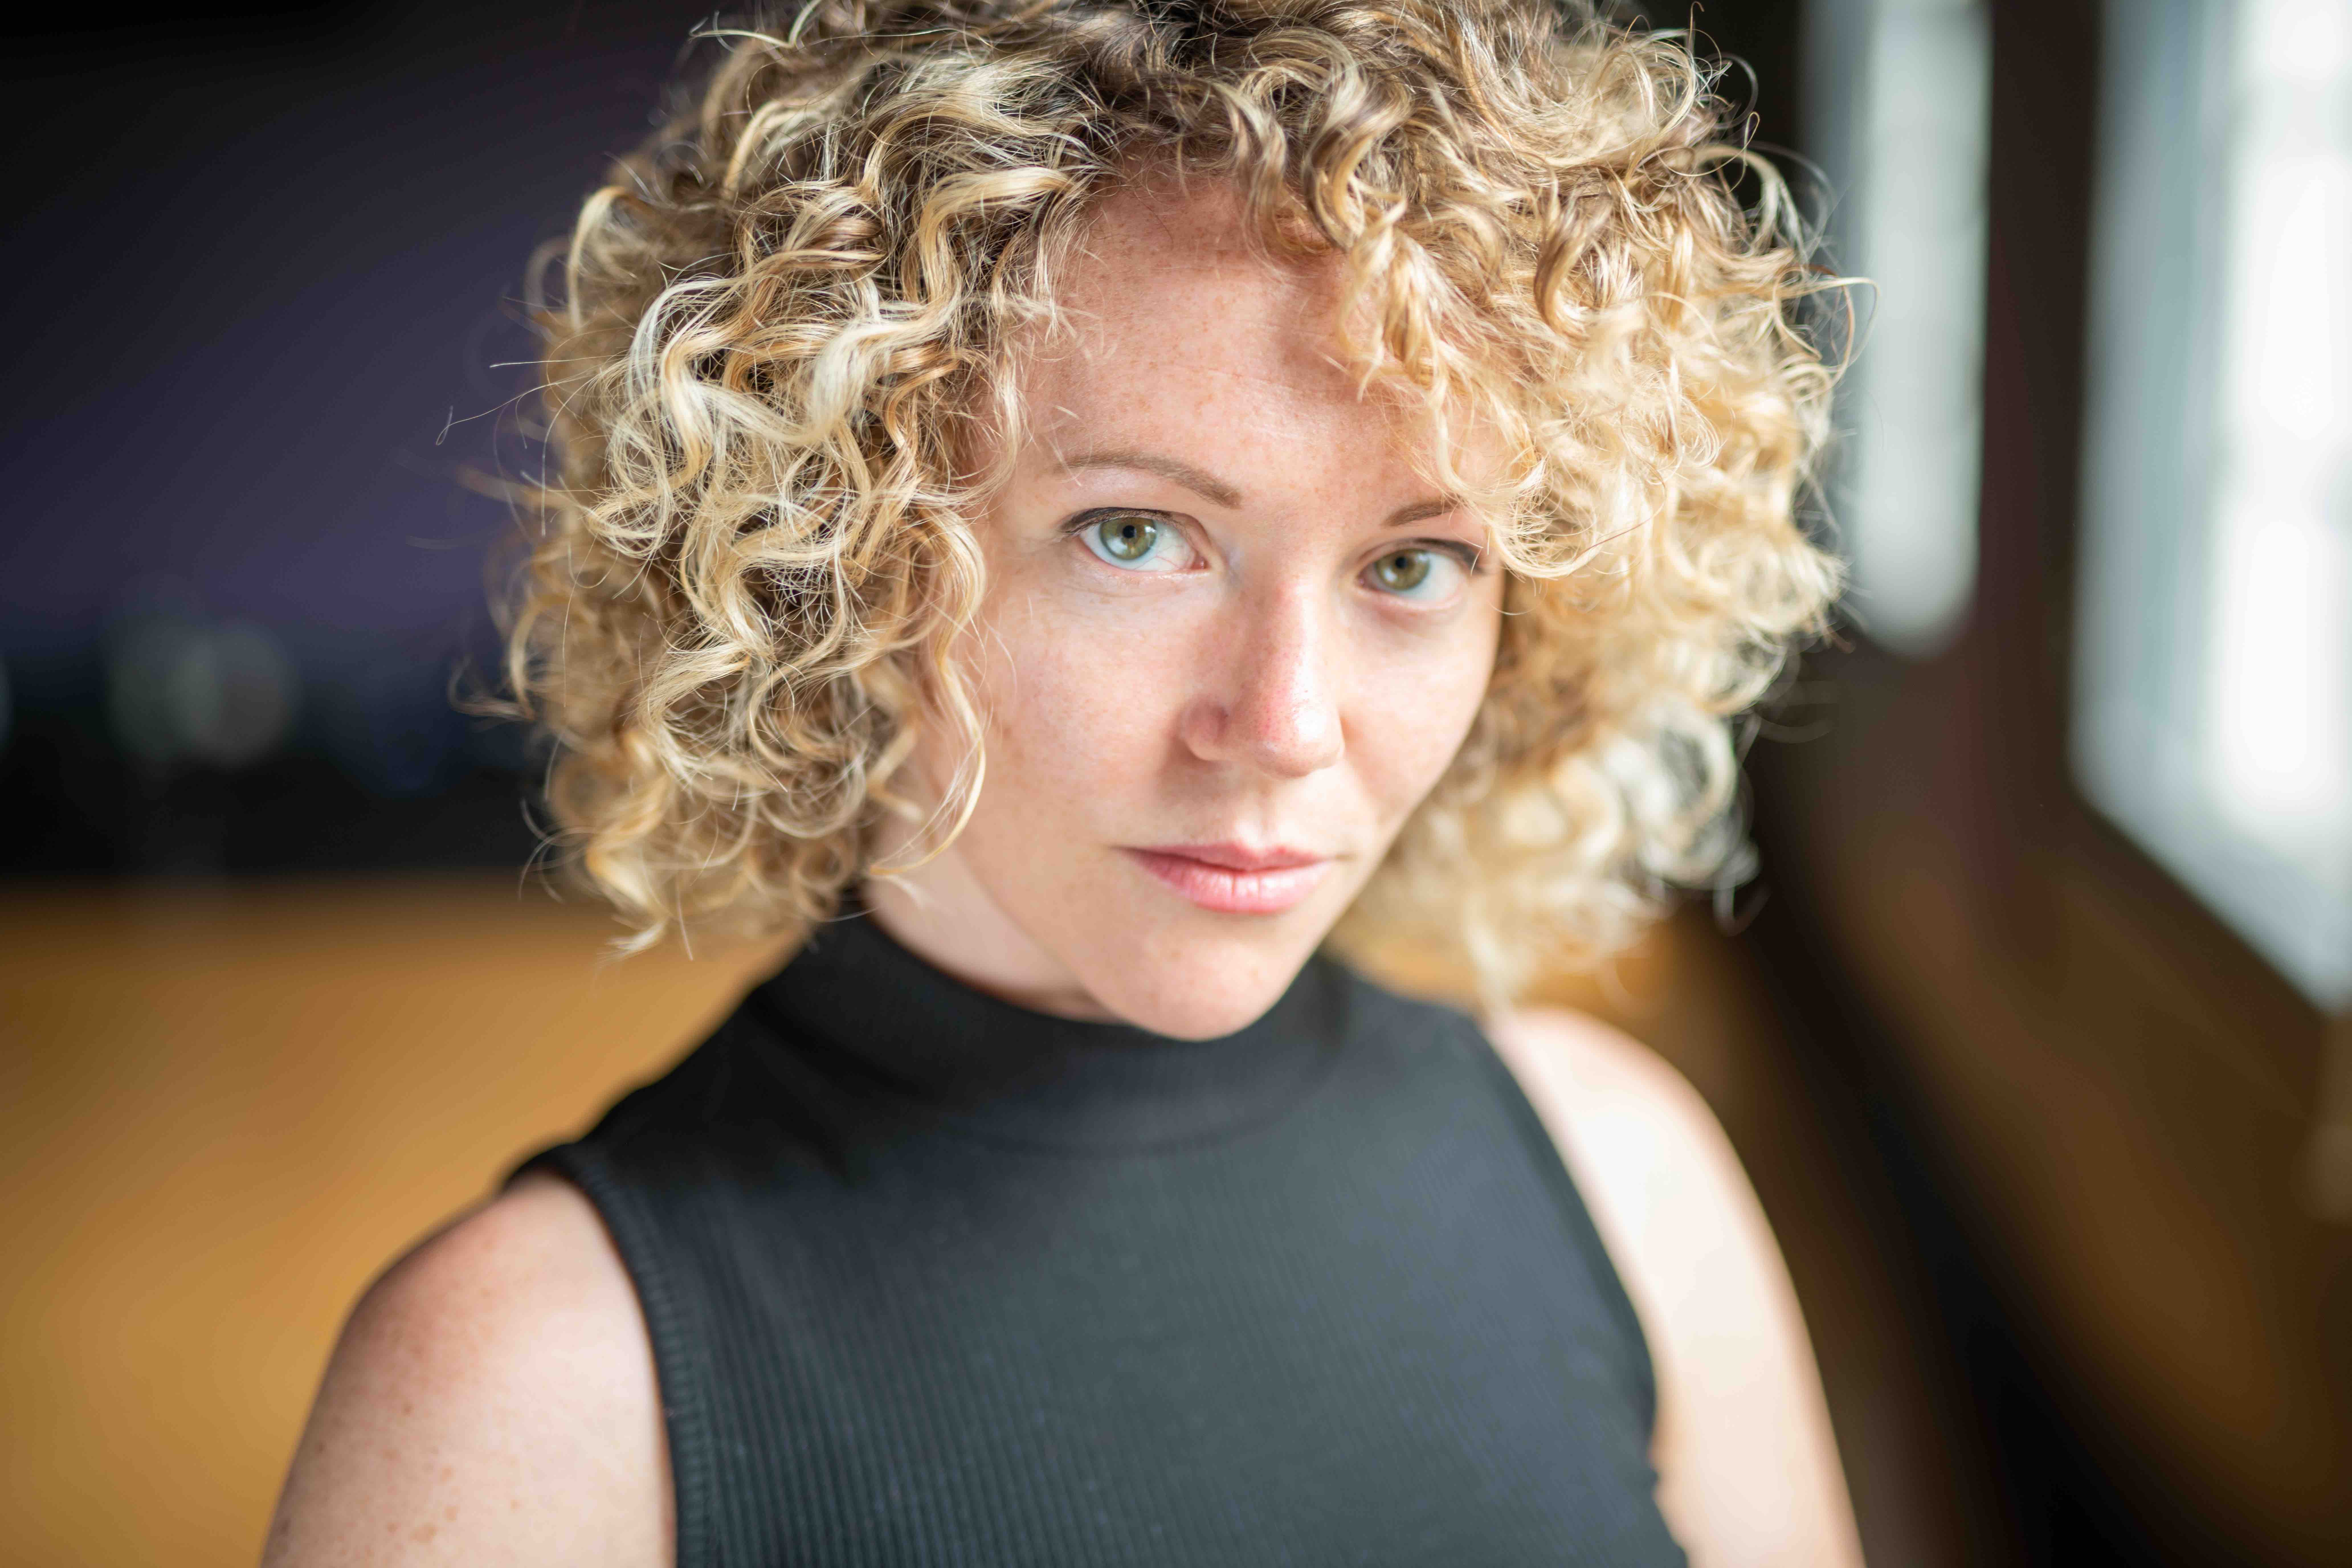 Courtney Abbott, a woman with curly blonde hair and blue eyes.